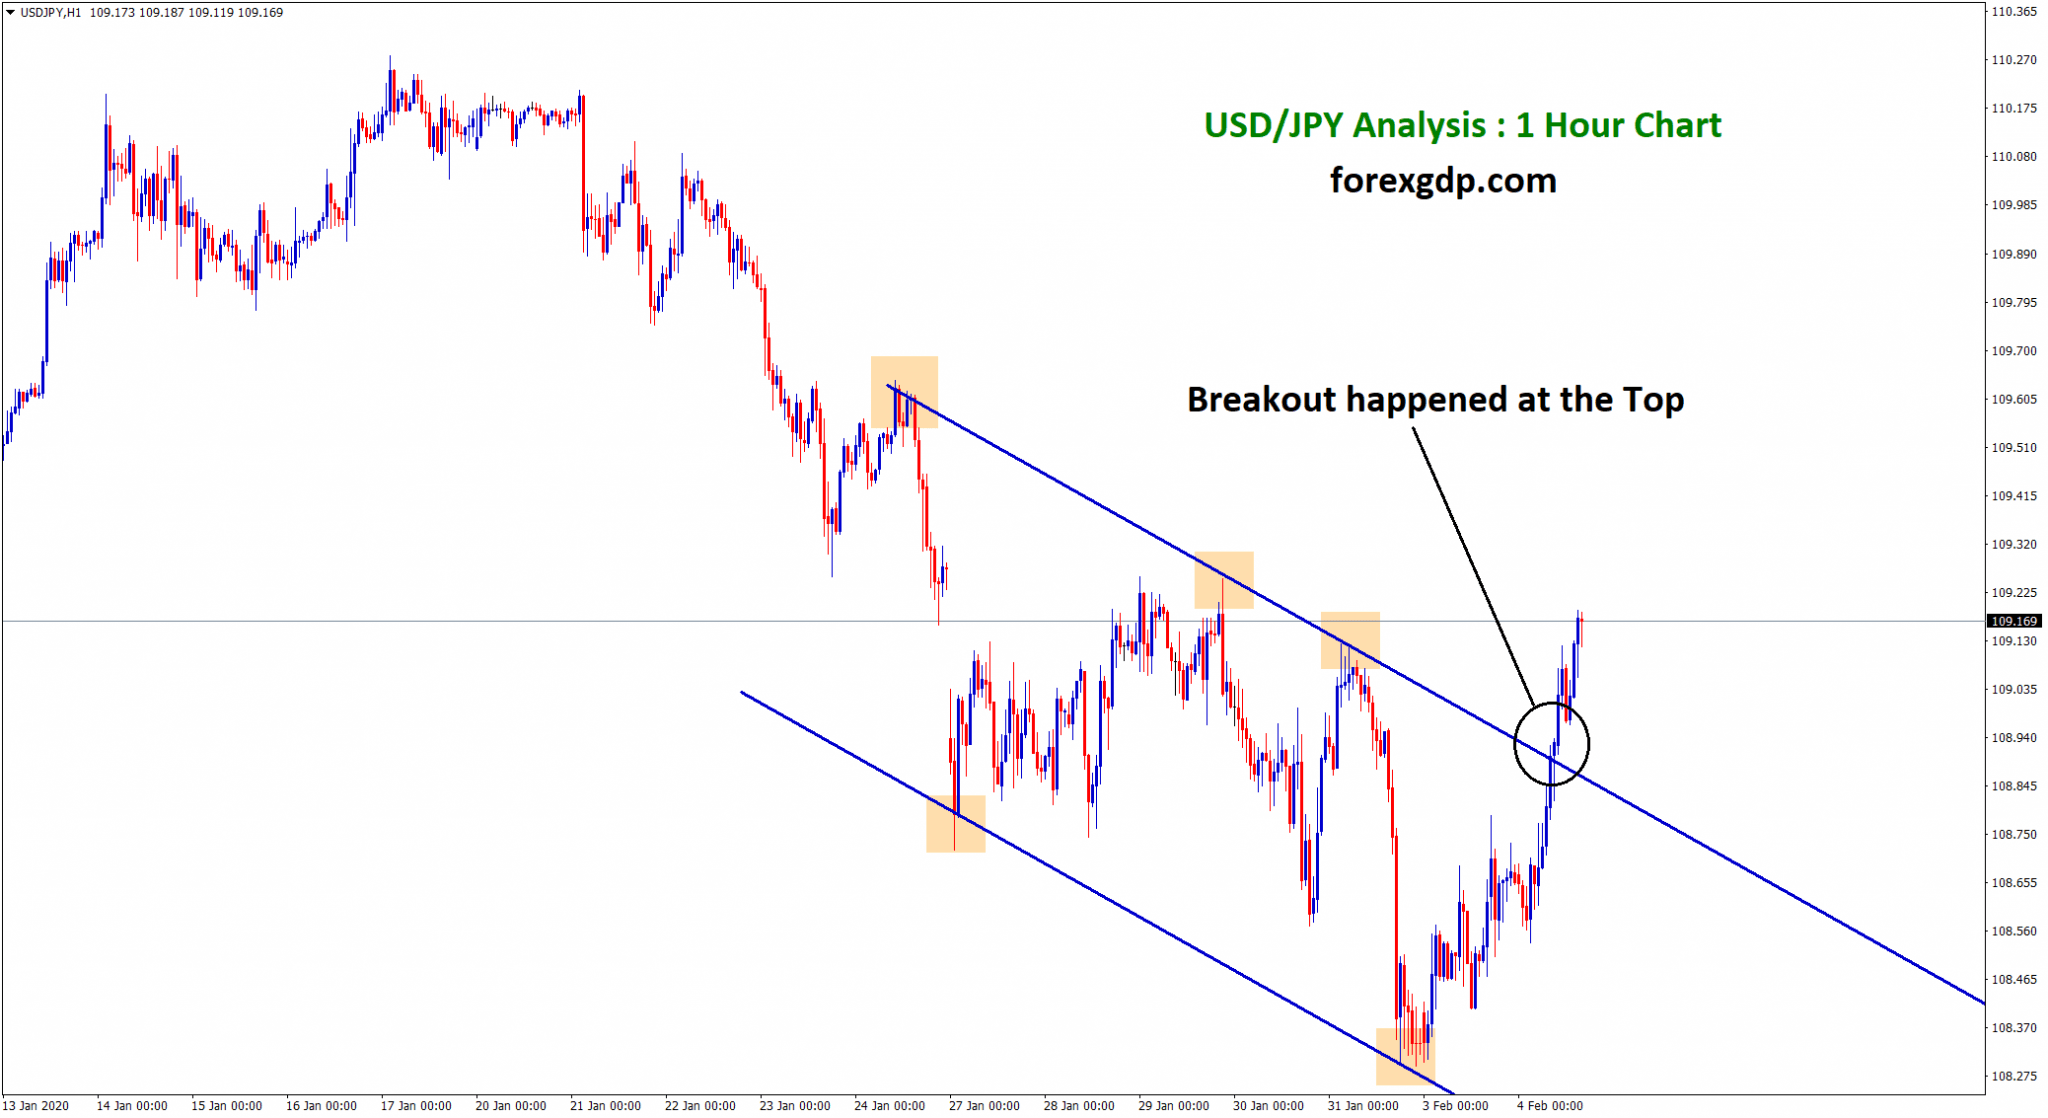 usd jpy chart analysis, breakout happened at the top